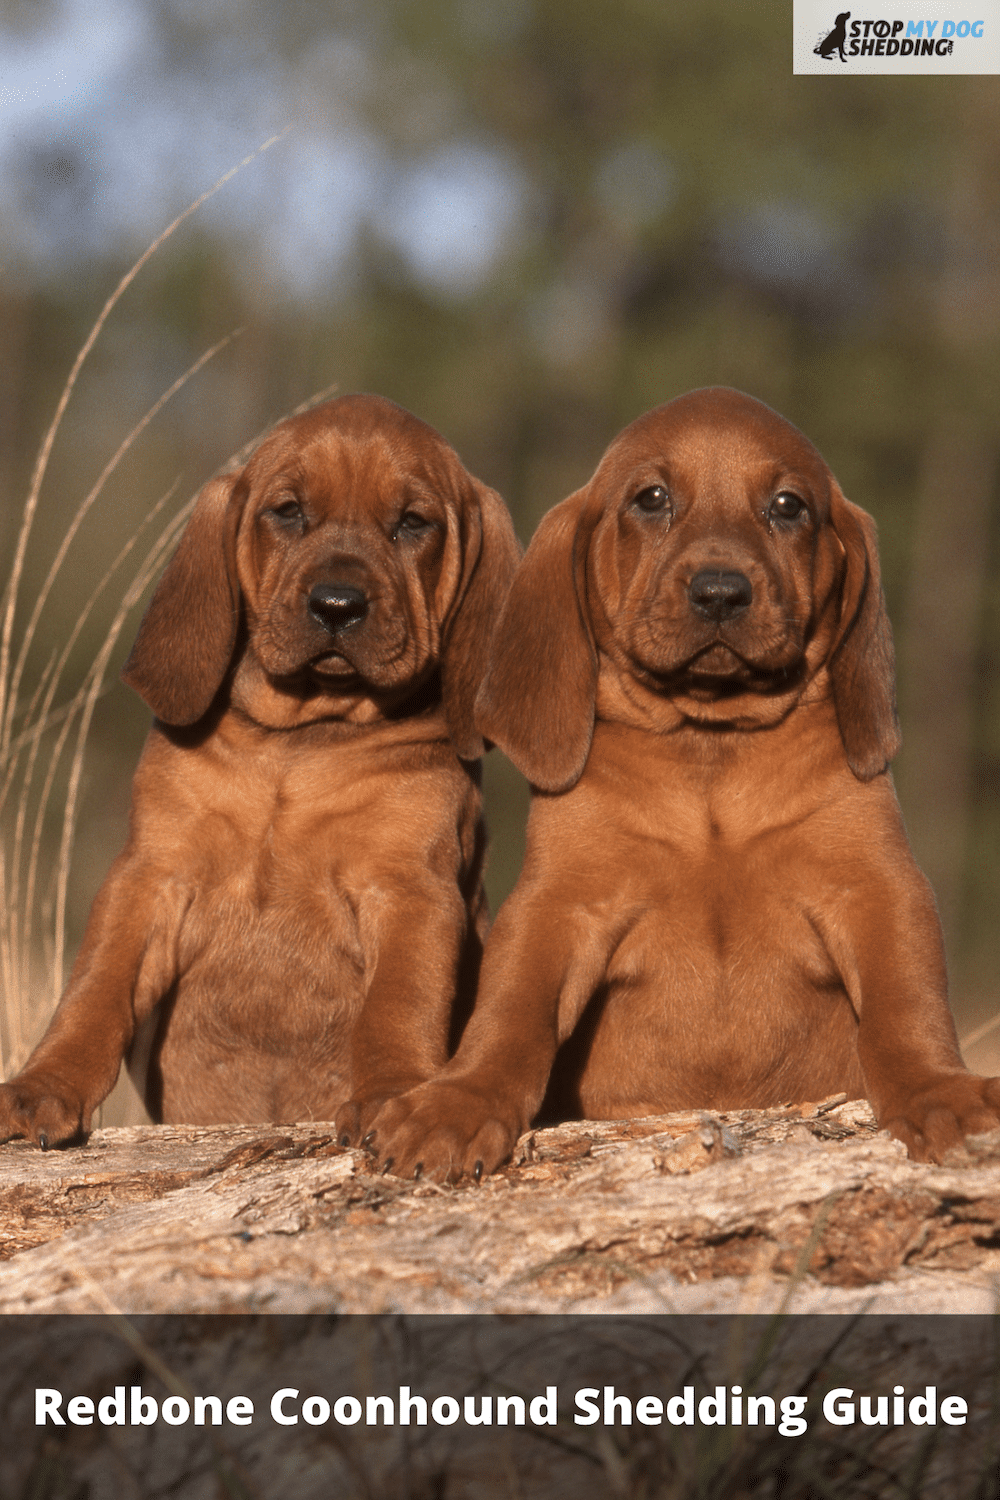 Do Redbone Coonhounds Shed?